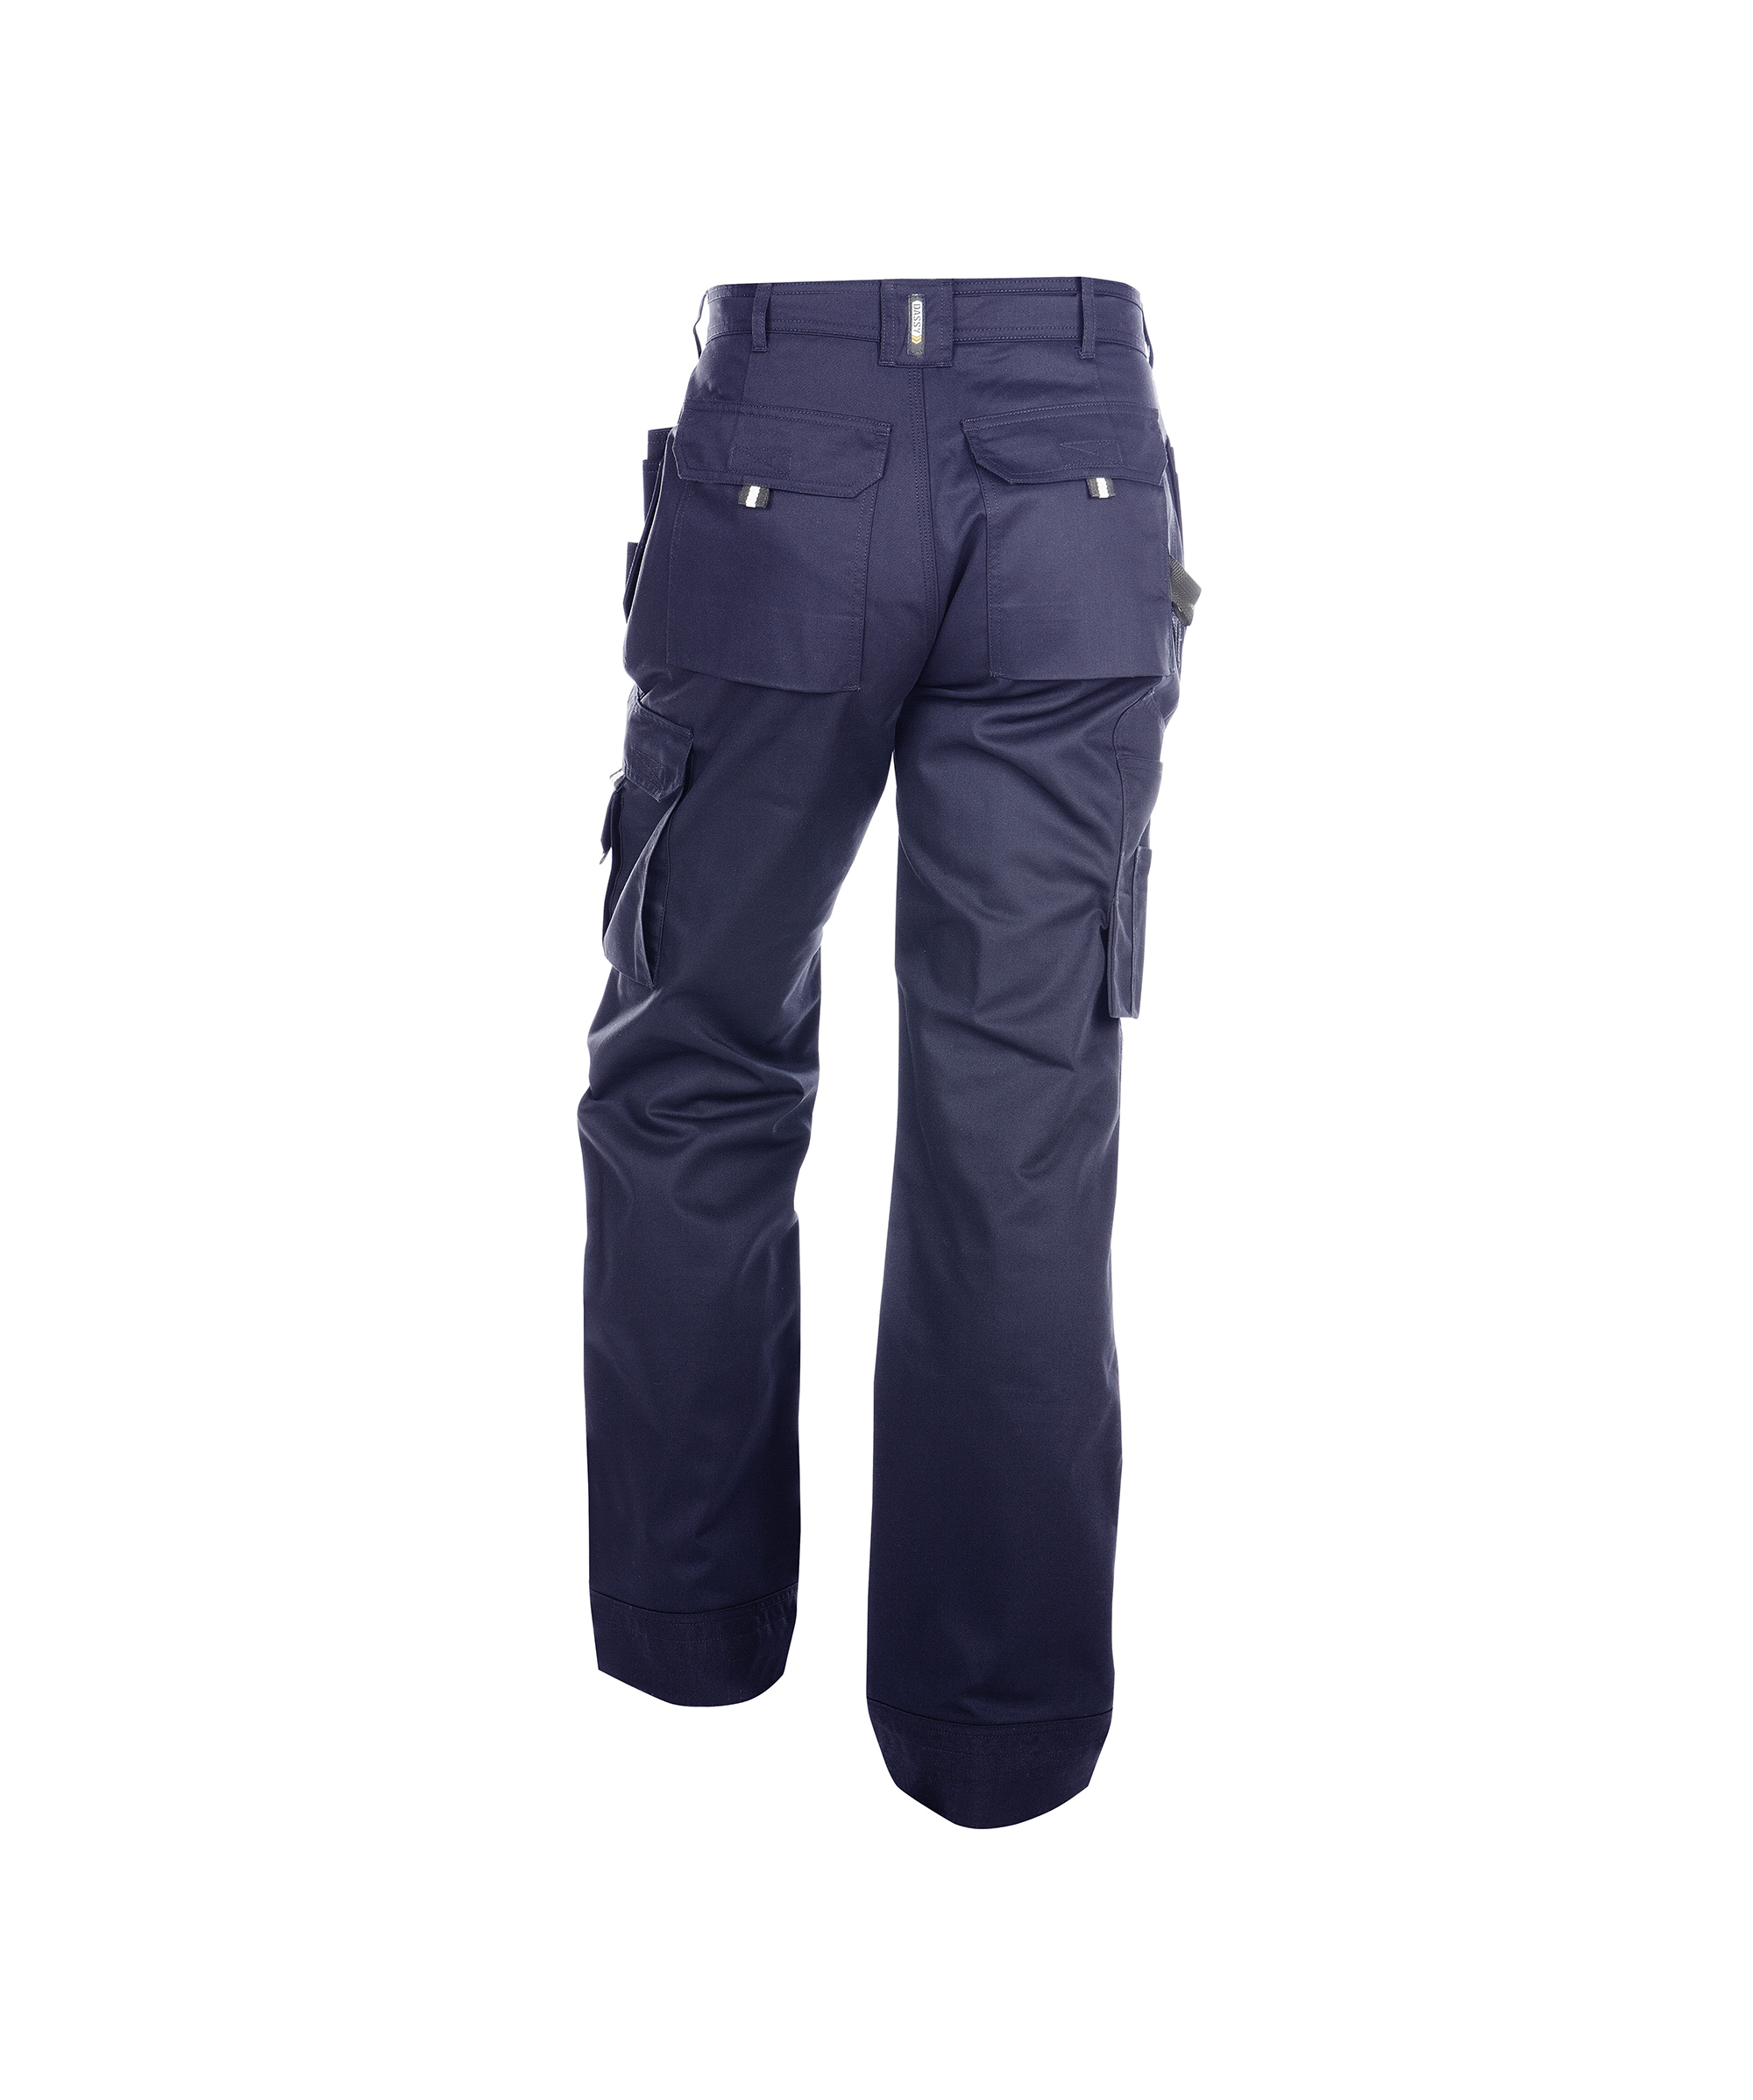 oxford_work-trousers-with-multi-pockets-and-knee-pockets_navy_back.jpg